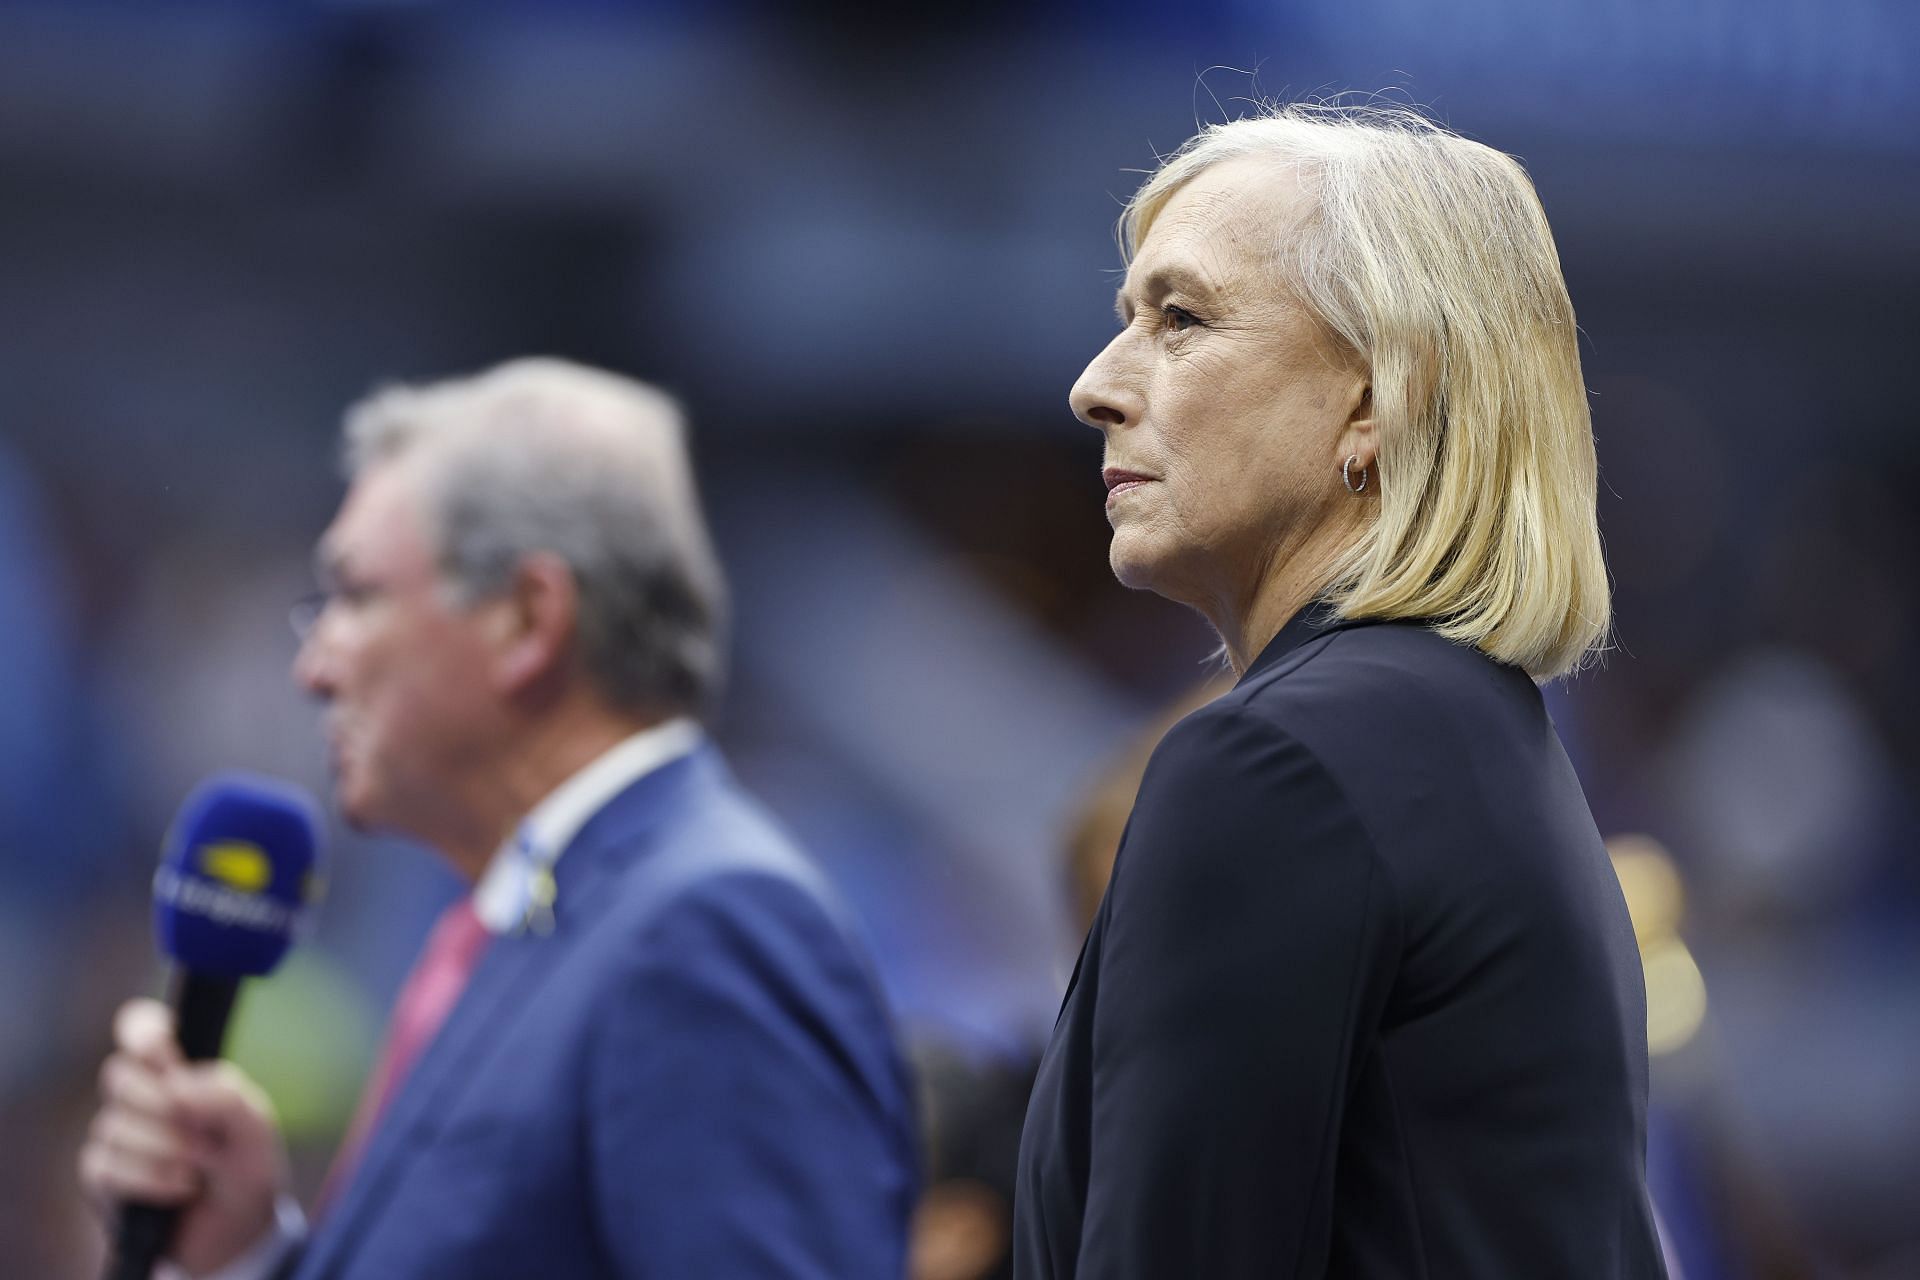 Martina Navratilova looks on after the Women&rsquo;s Singles Final match between Iga Swiatek and Ons Jabeur at the 2022 US Open